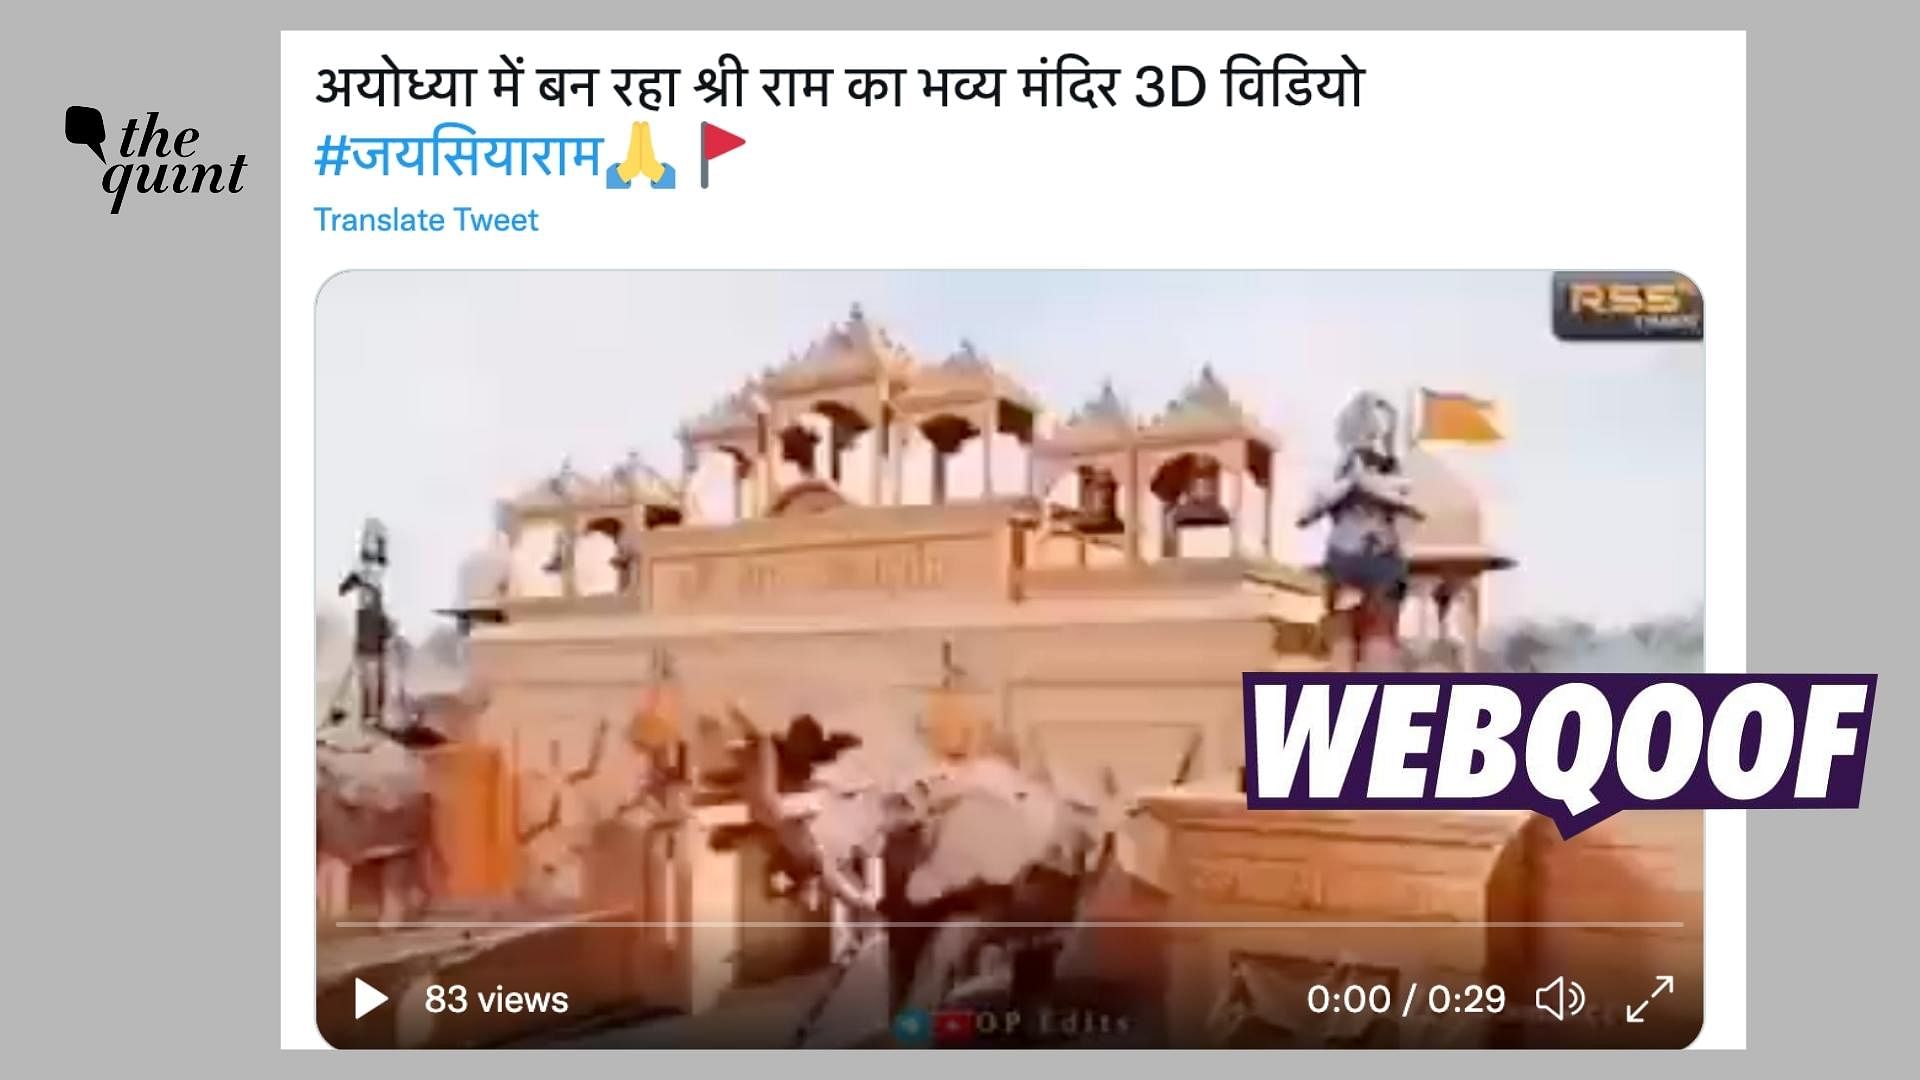 <div class="paragraphs"><p>The claim states that it shows the official 3D video of Ayodhya's Ram Mandir.&nbsp;</p></div>